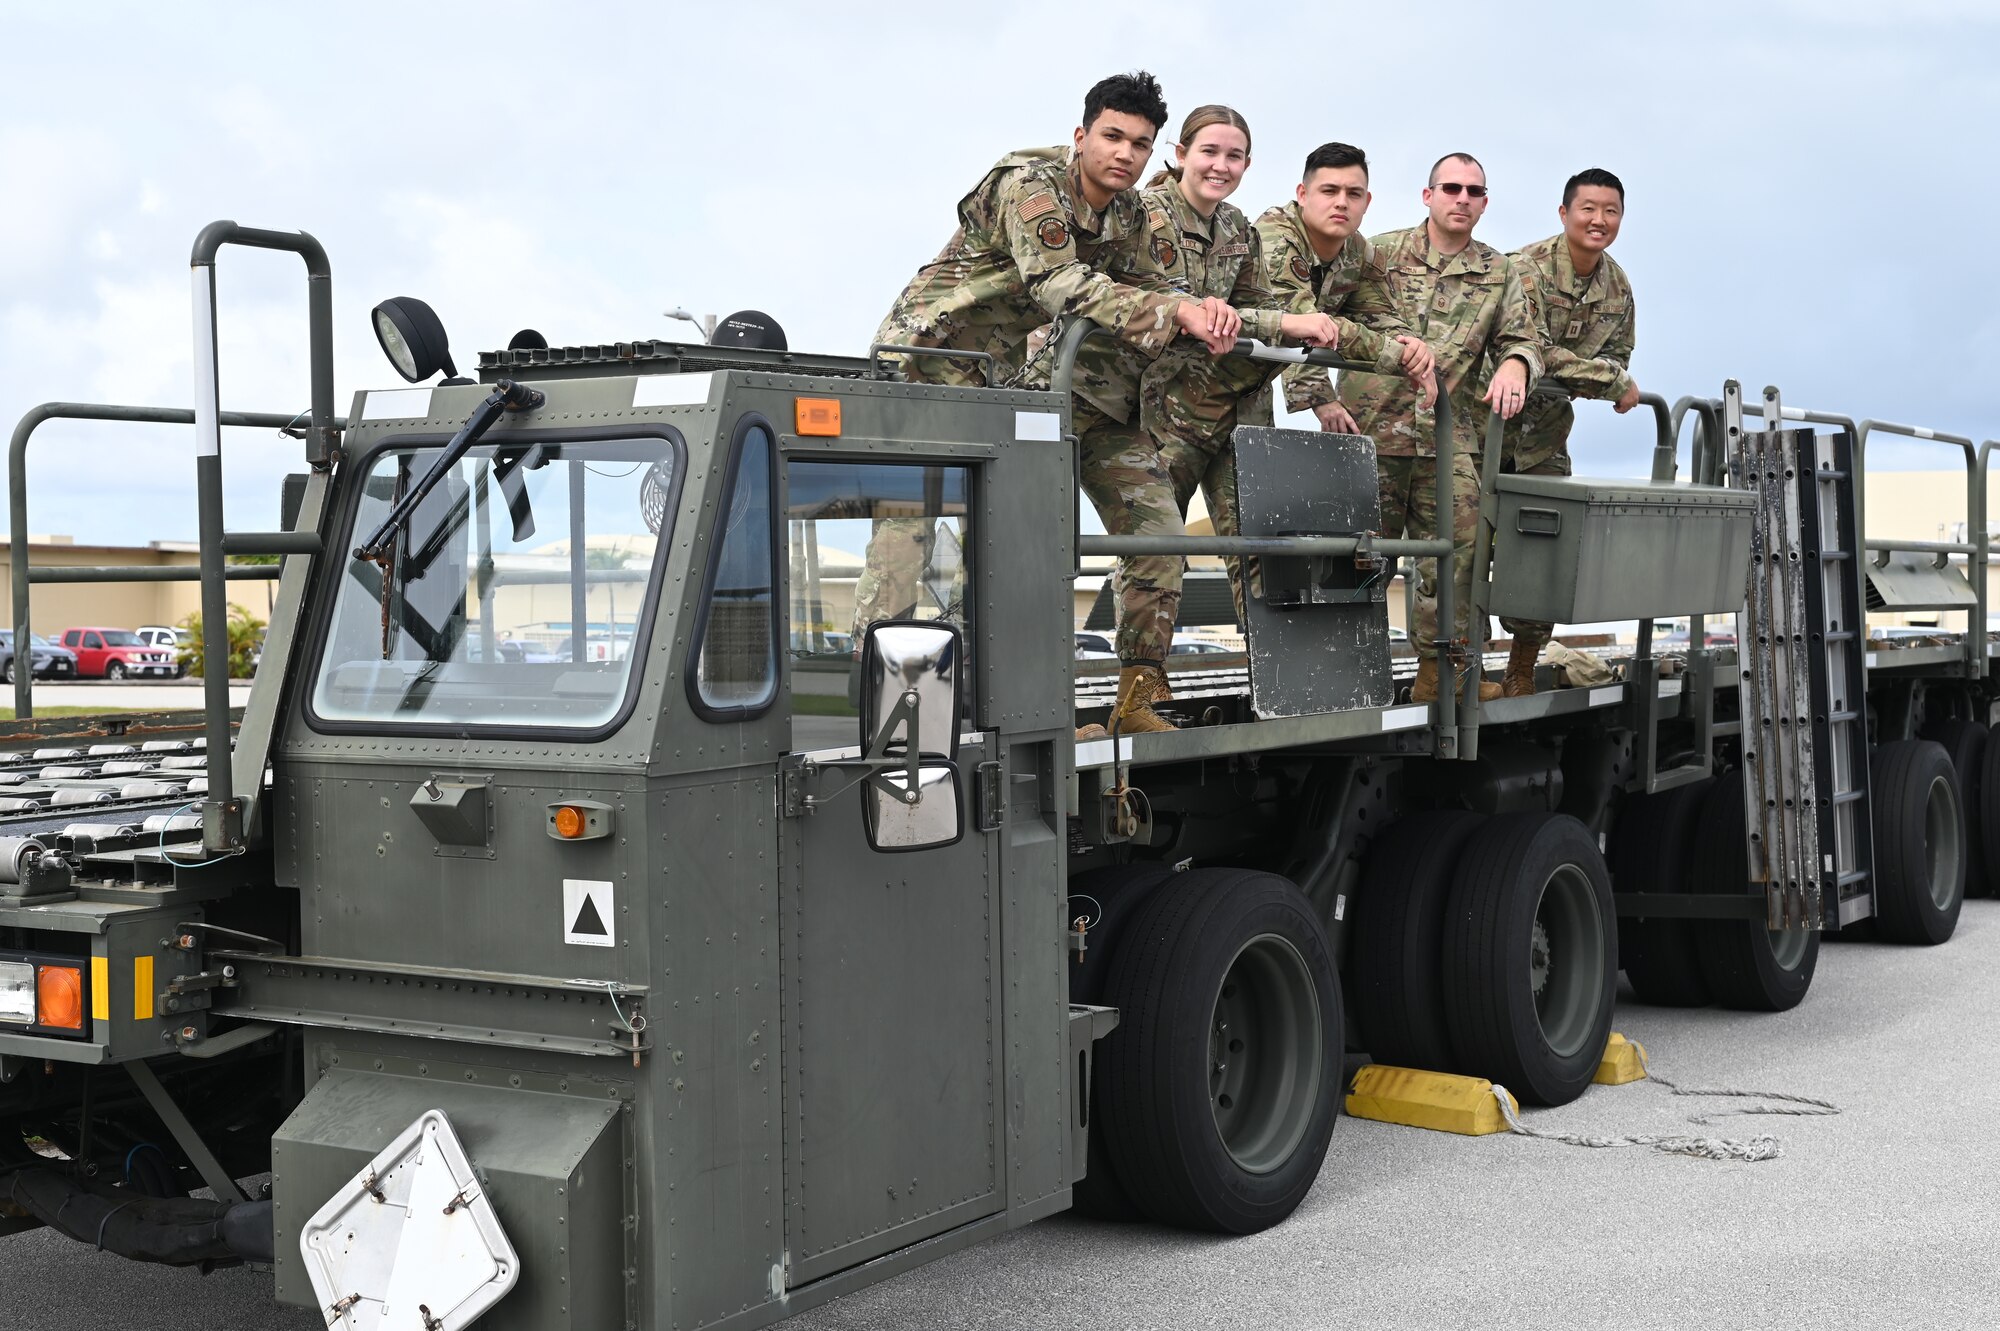 Airmen from the 36th Logistics Readiness Squadron pose on a container loader for a group picture at Andersen Air Force Base, December 15th, 2021. The Airmen formed a last minute cargo load team in support of an emergency delivery of Reverse Osmosis Water Purification Units to Wake Island after their water purifier malfunctioned, leaving the atoll without potable water. (U.S. Air Force photo by Staff Sgt. Nicholas Crisp)